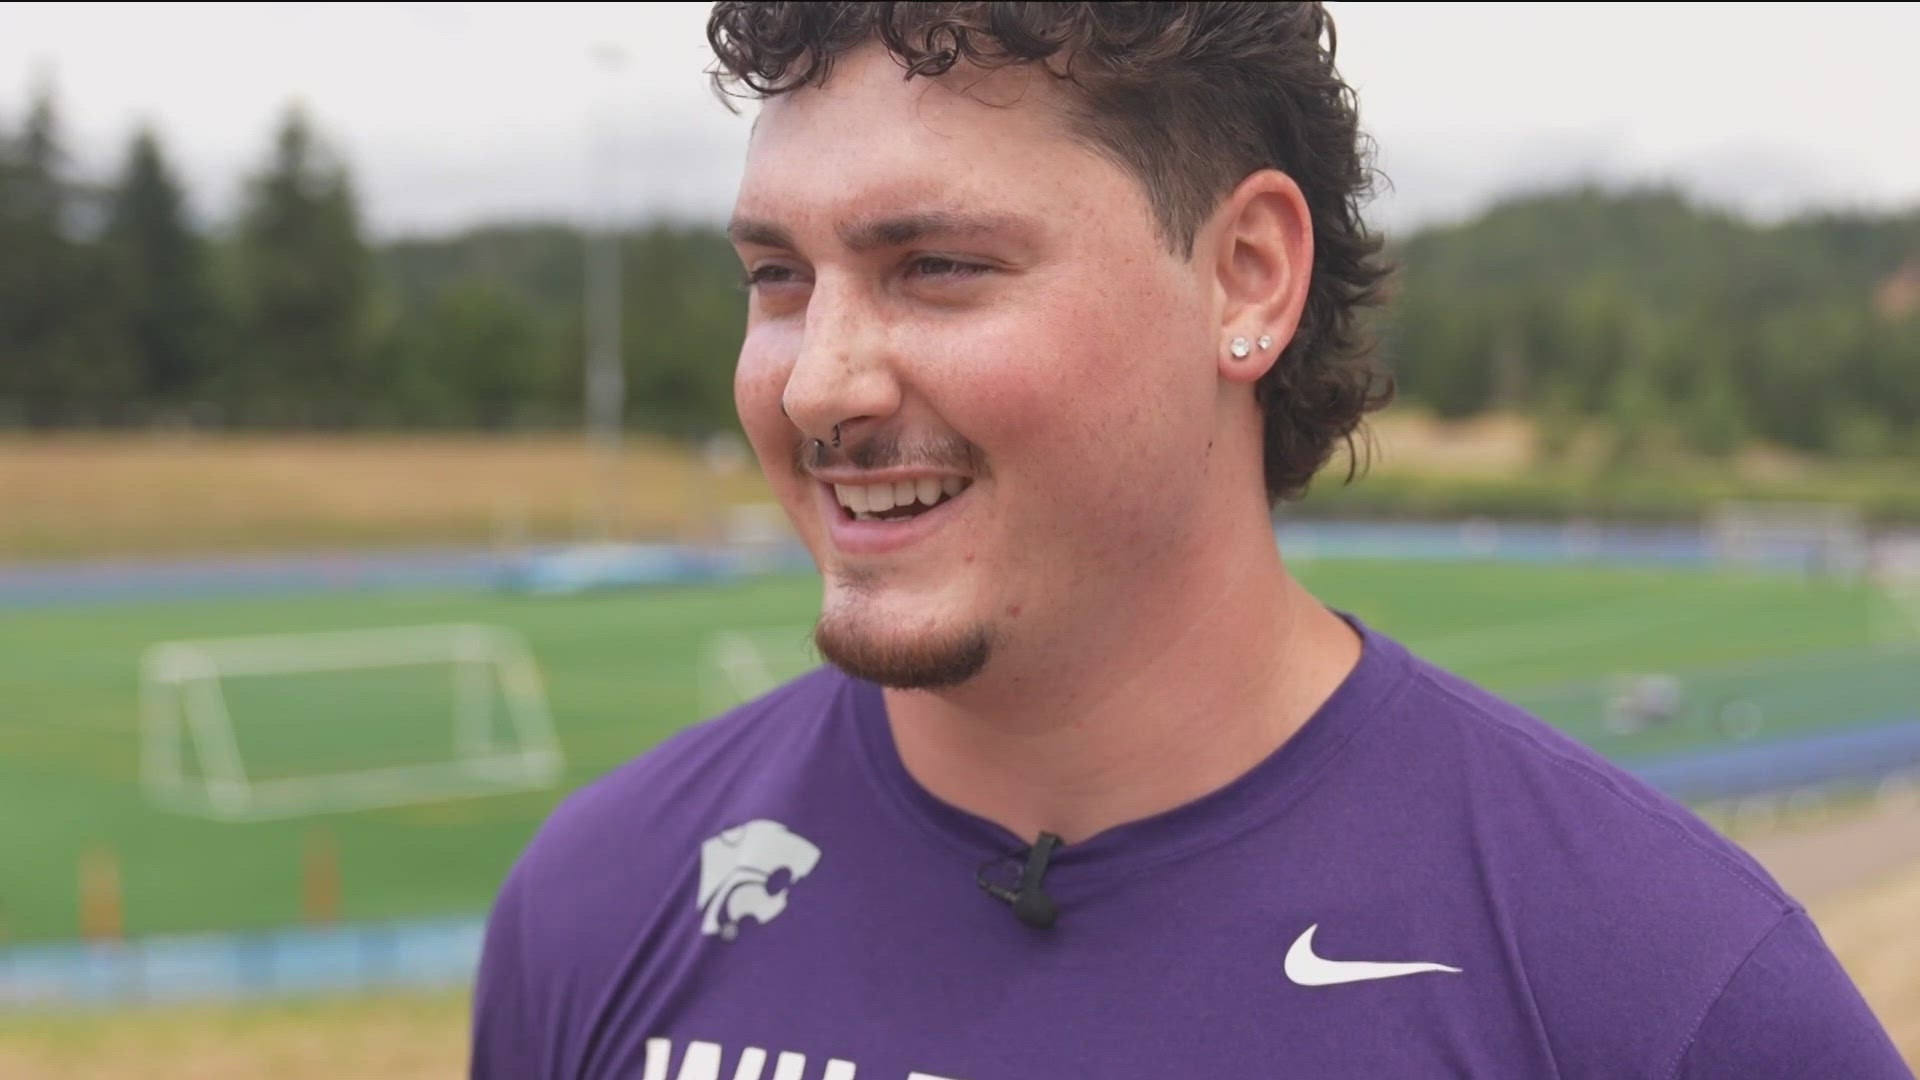 The Timberline High grad captured the men's hammer throw title at the Big 12 Championships in May. McCall competes in the qualifying round Friday in Eugene.